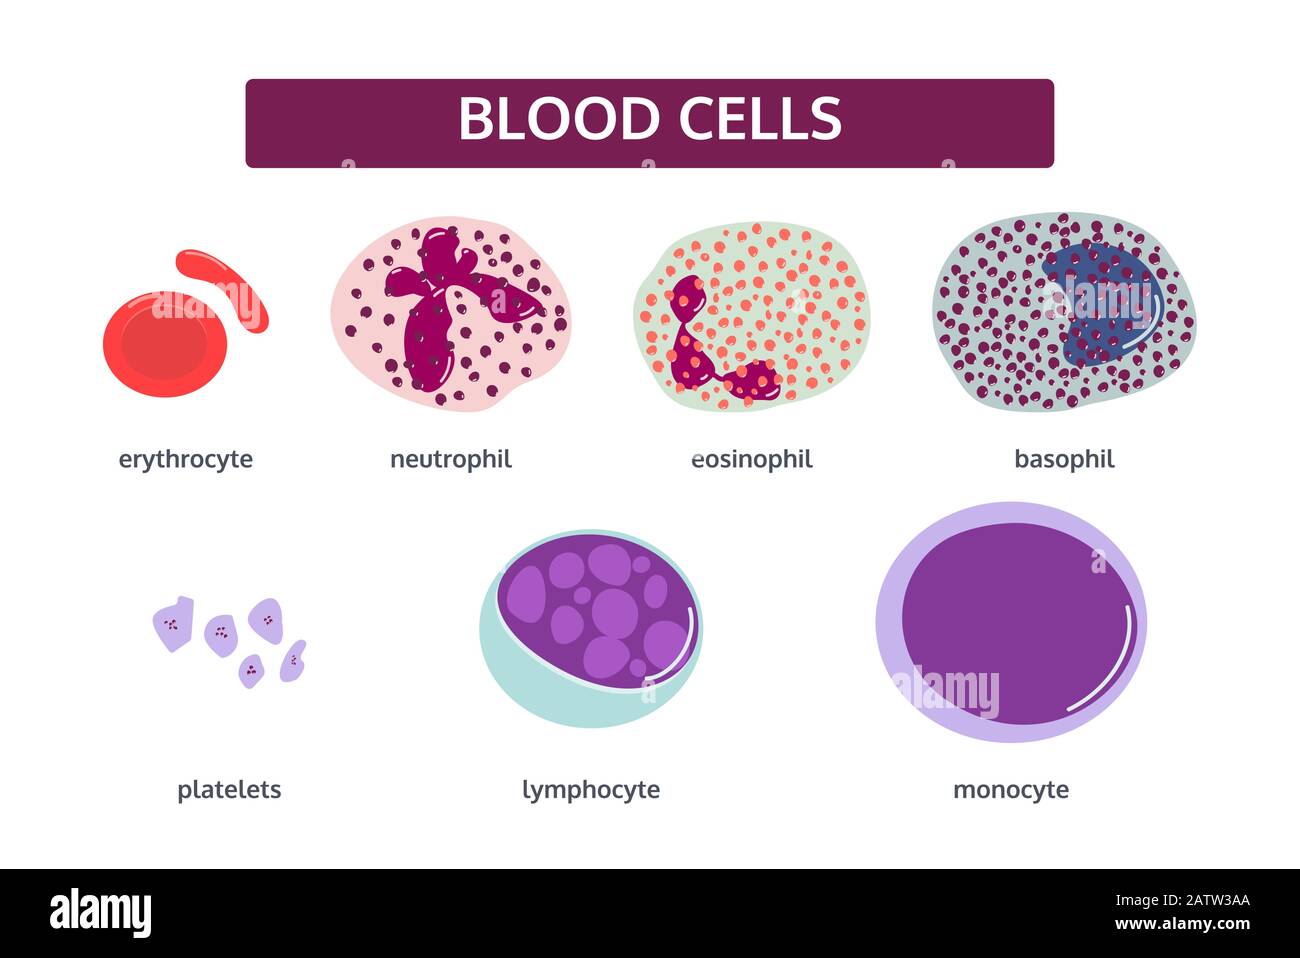 Vector set of blood cells in flat style. White blood cells - basophil; eosinophil; monocyte; neutrophil; lymphocyte. Red blood cells -erythrocyte. Stock Vector